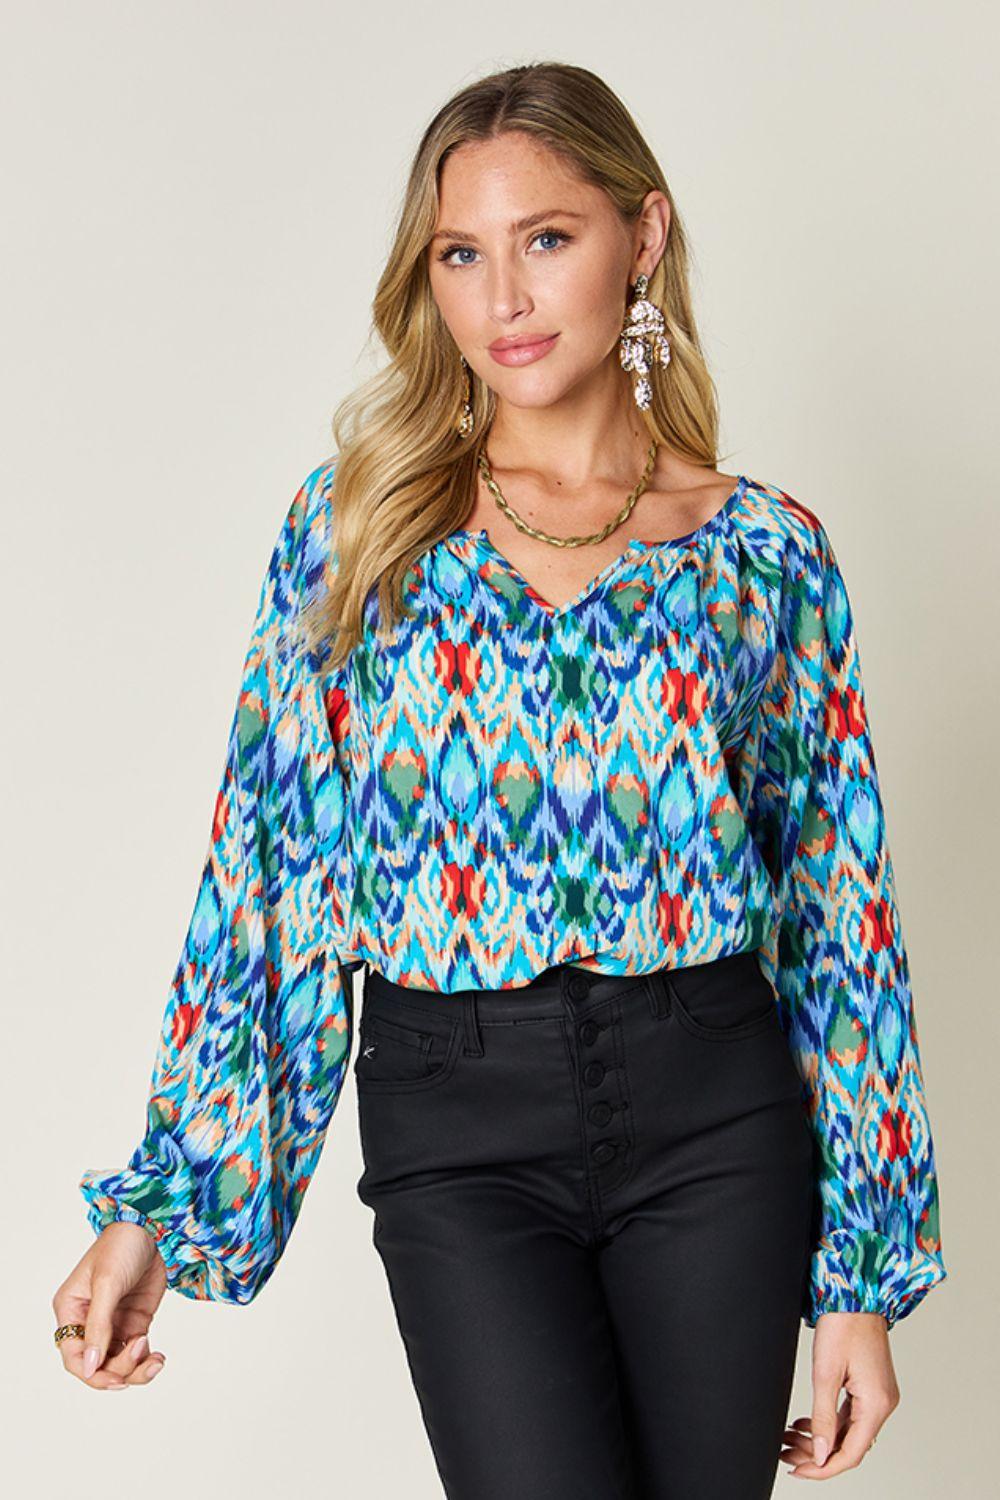 Double Take Full Size Printed Balloon Sleeve Blouse Shirts & Tops